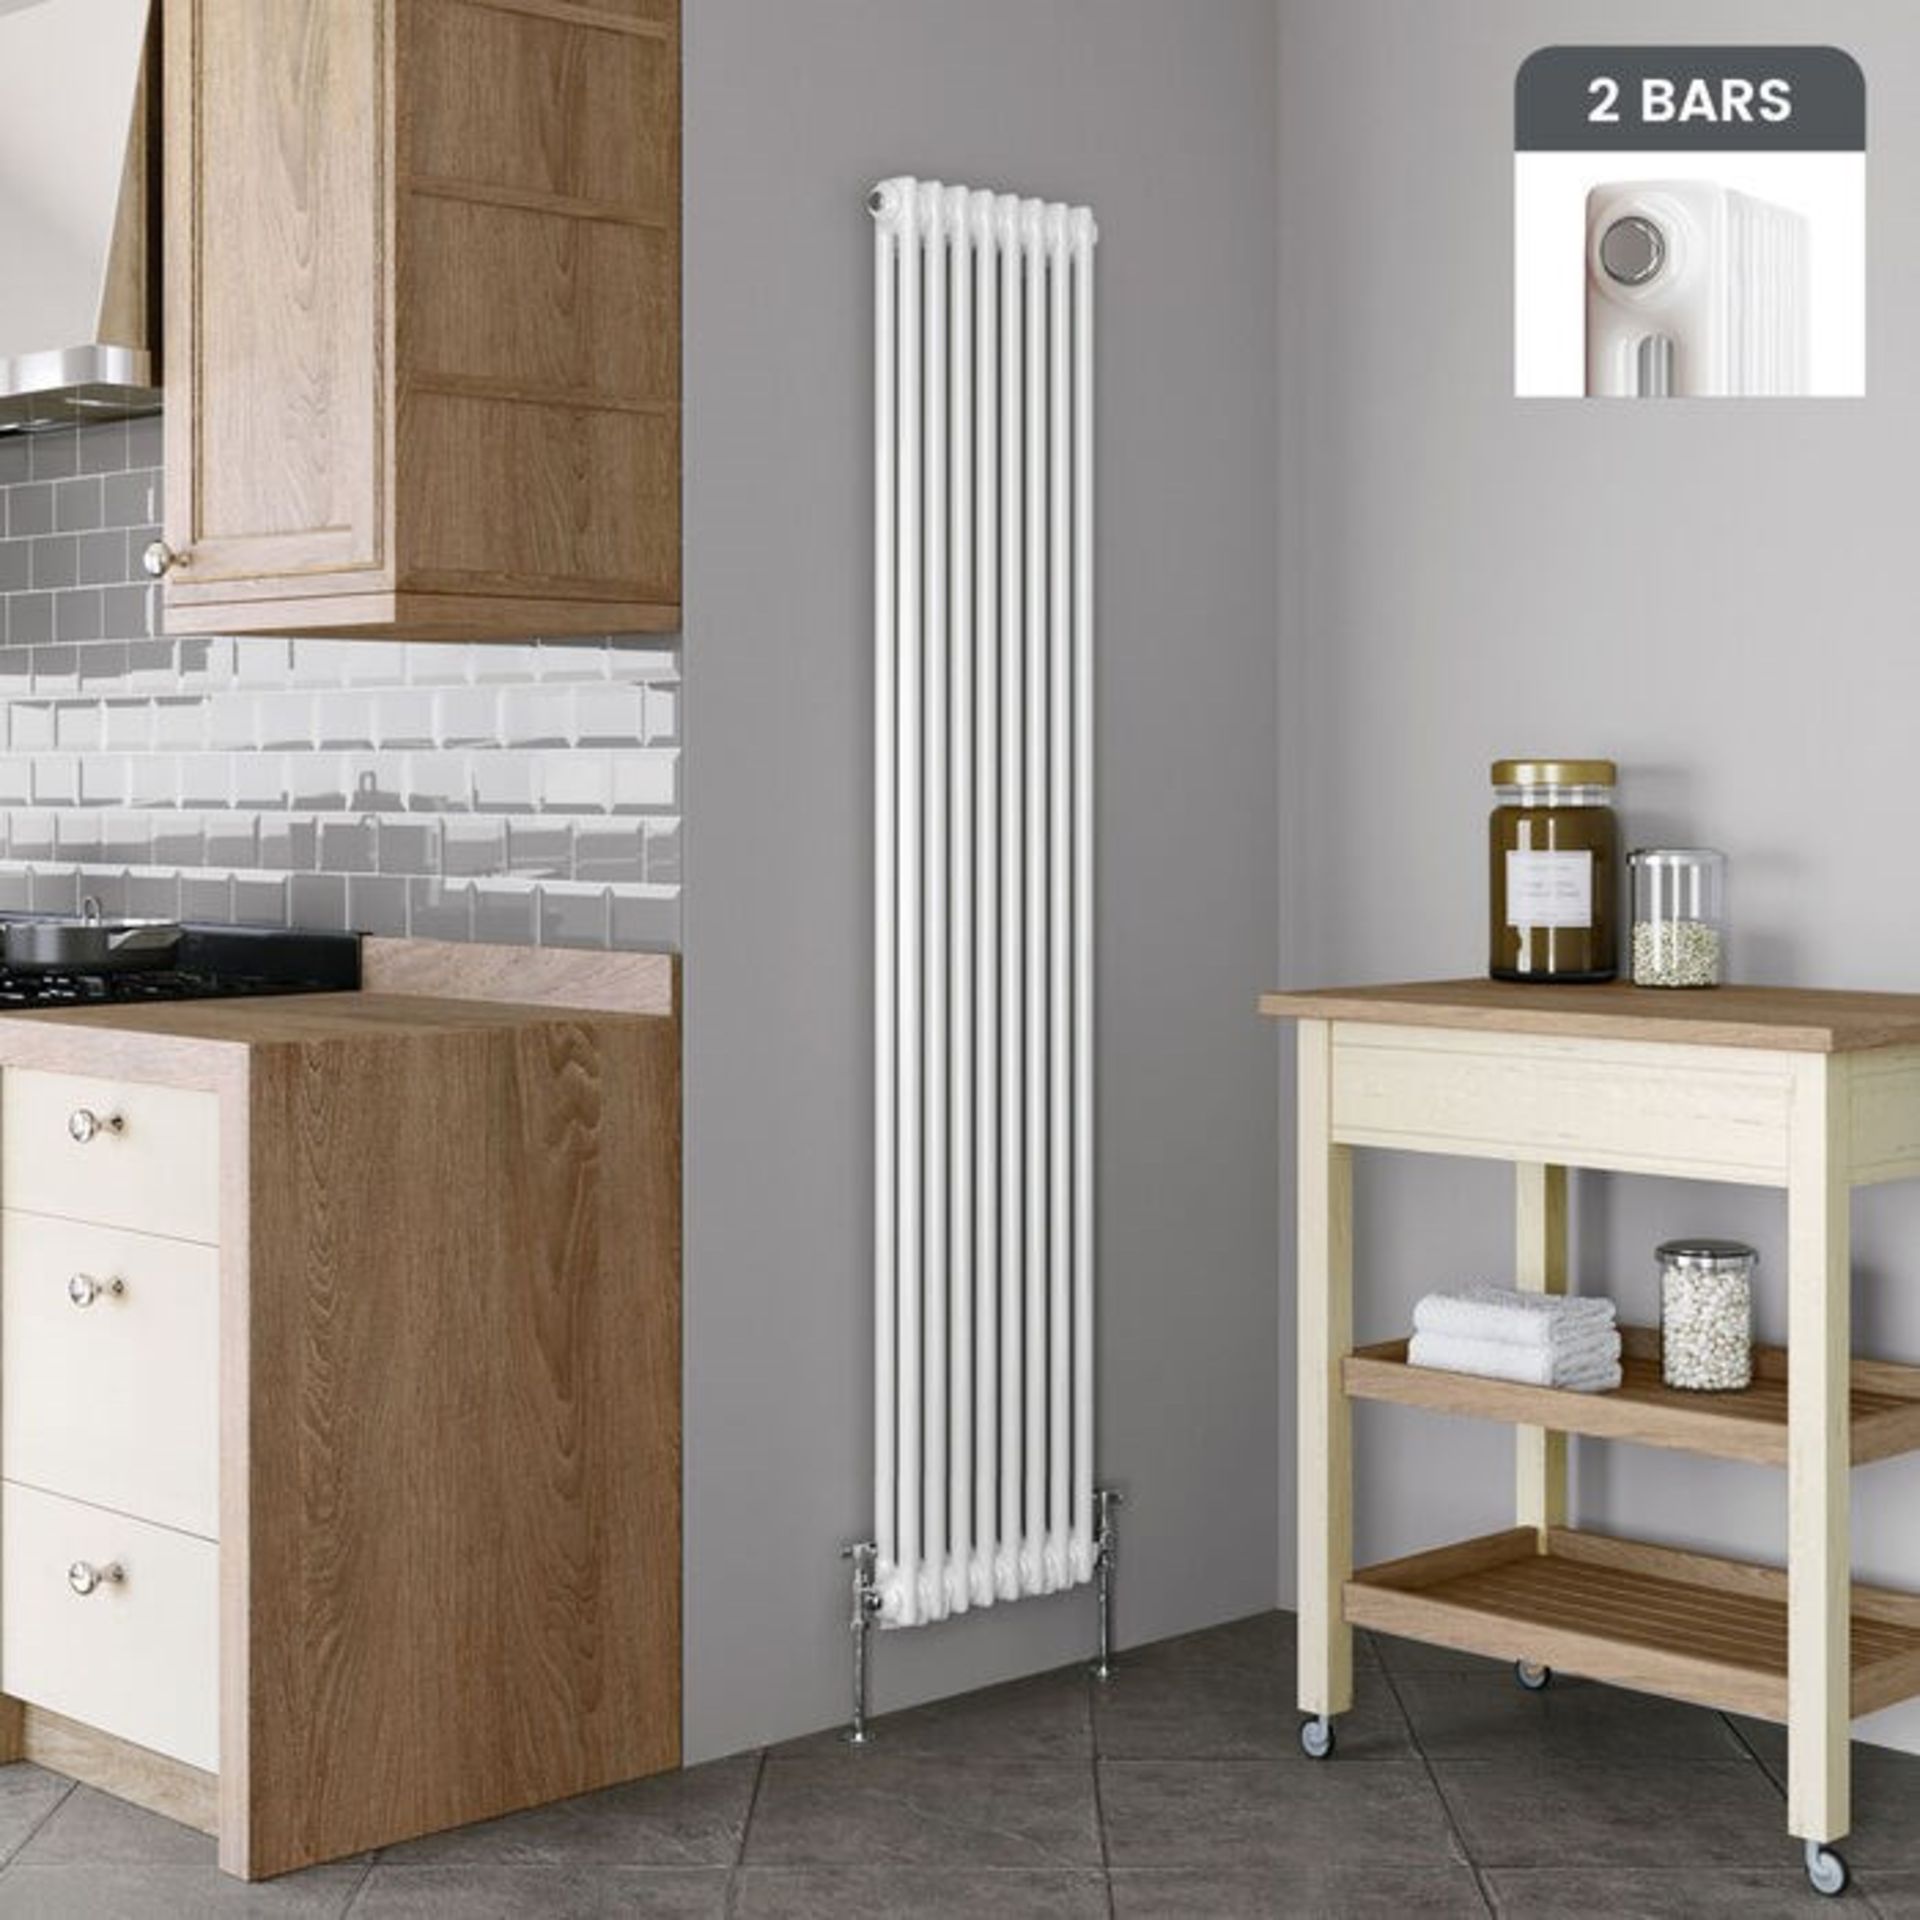 (JL121) 2000x490mm White Double Panel Vertical Colosseum Traditional Radiator. RRP £519.99. ...(( - Image 3 of 4